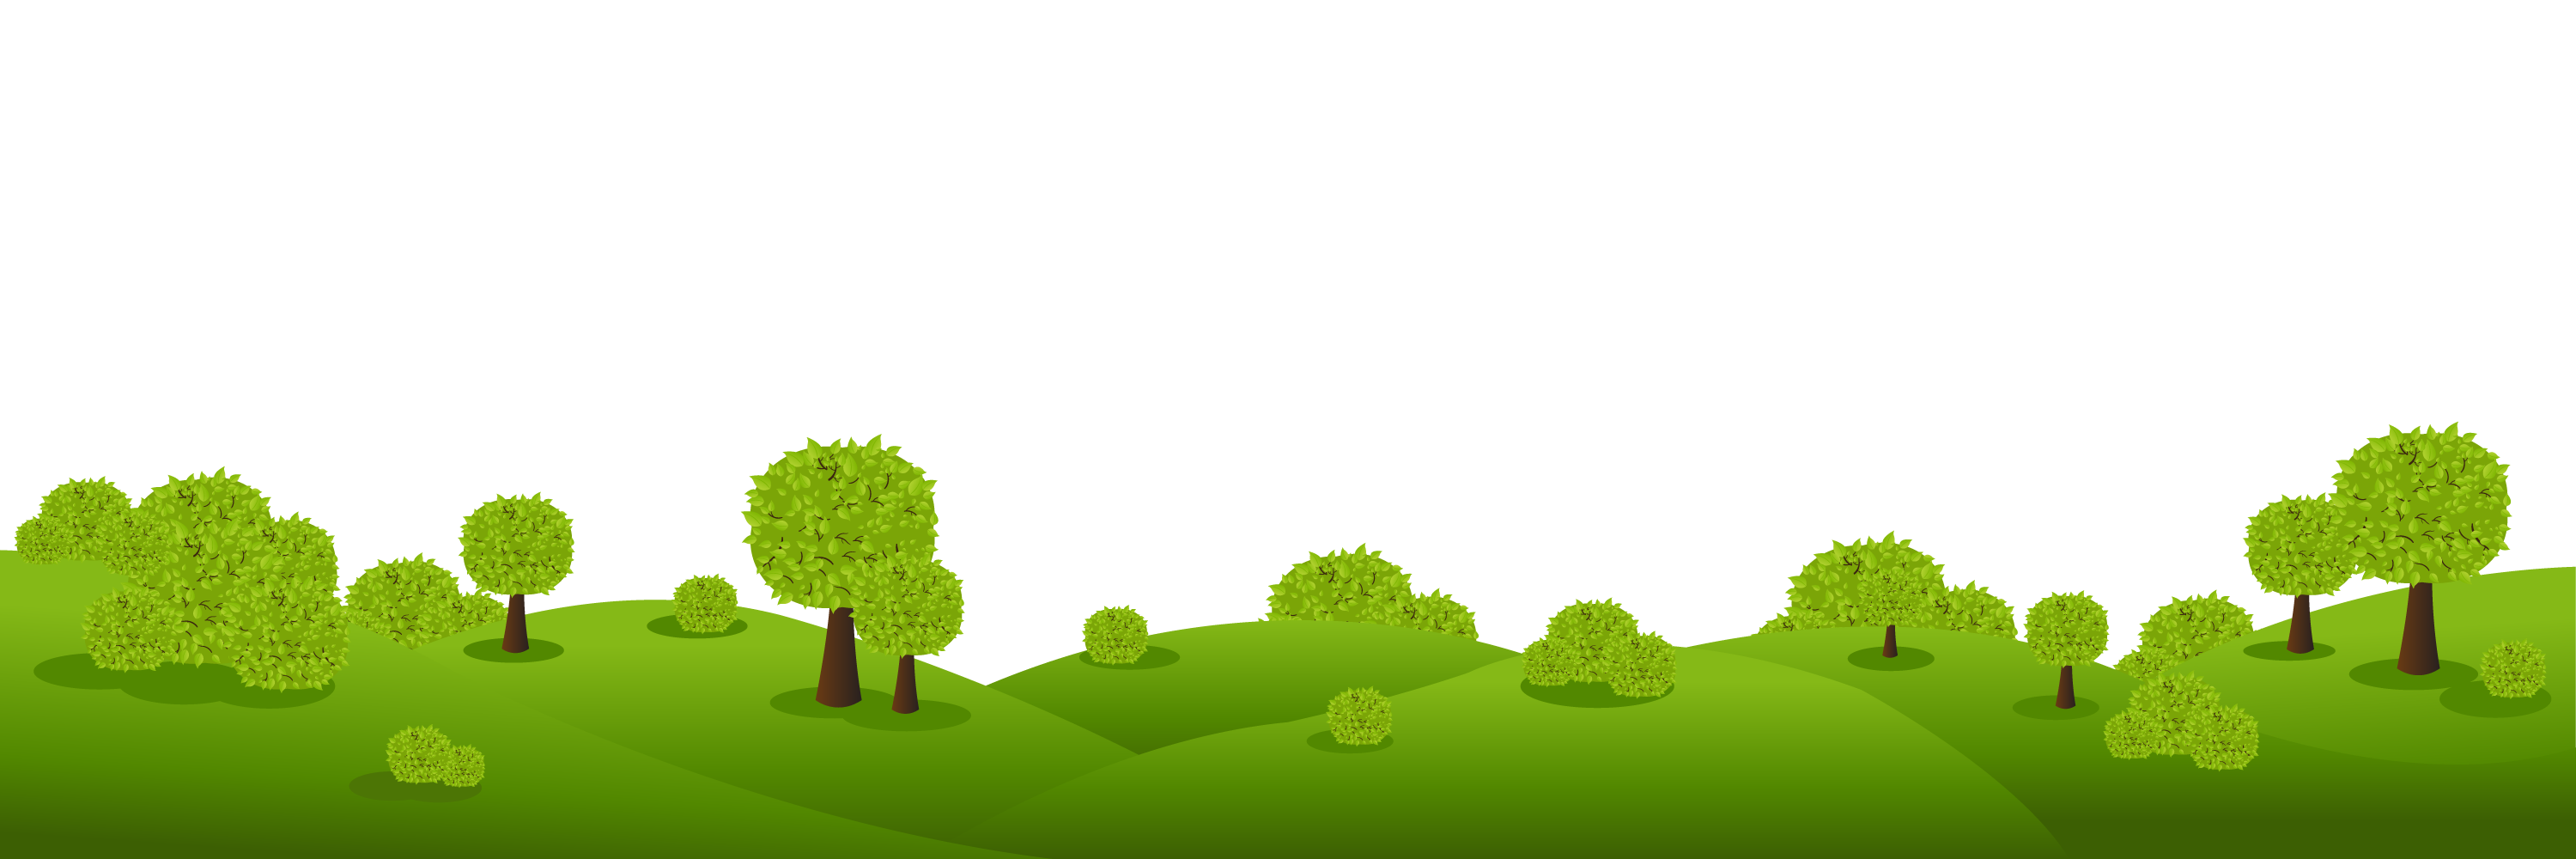 Grass clipart grass field. Landscape panorama royalty free